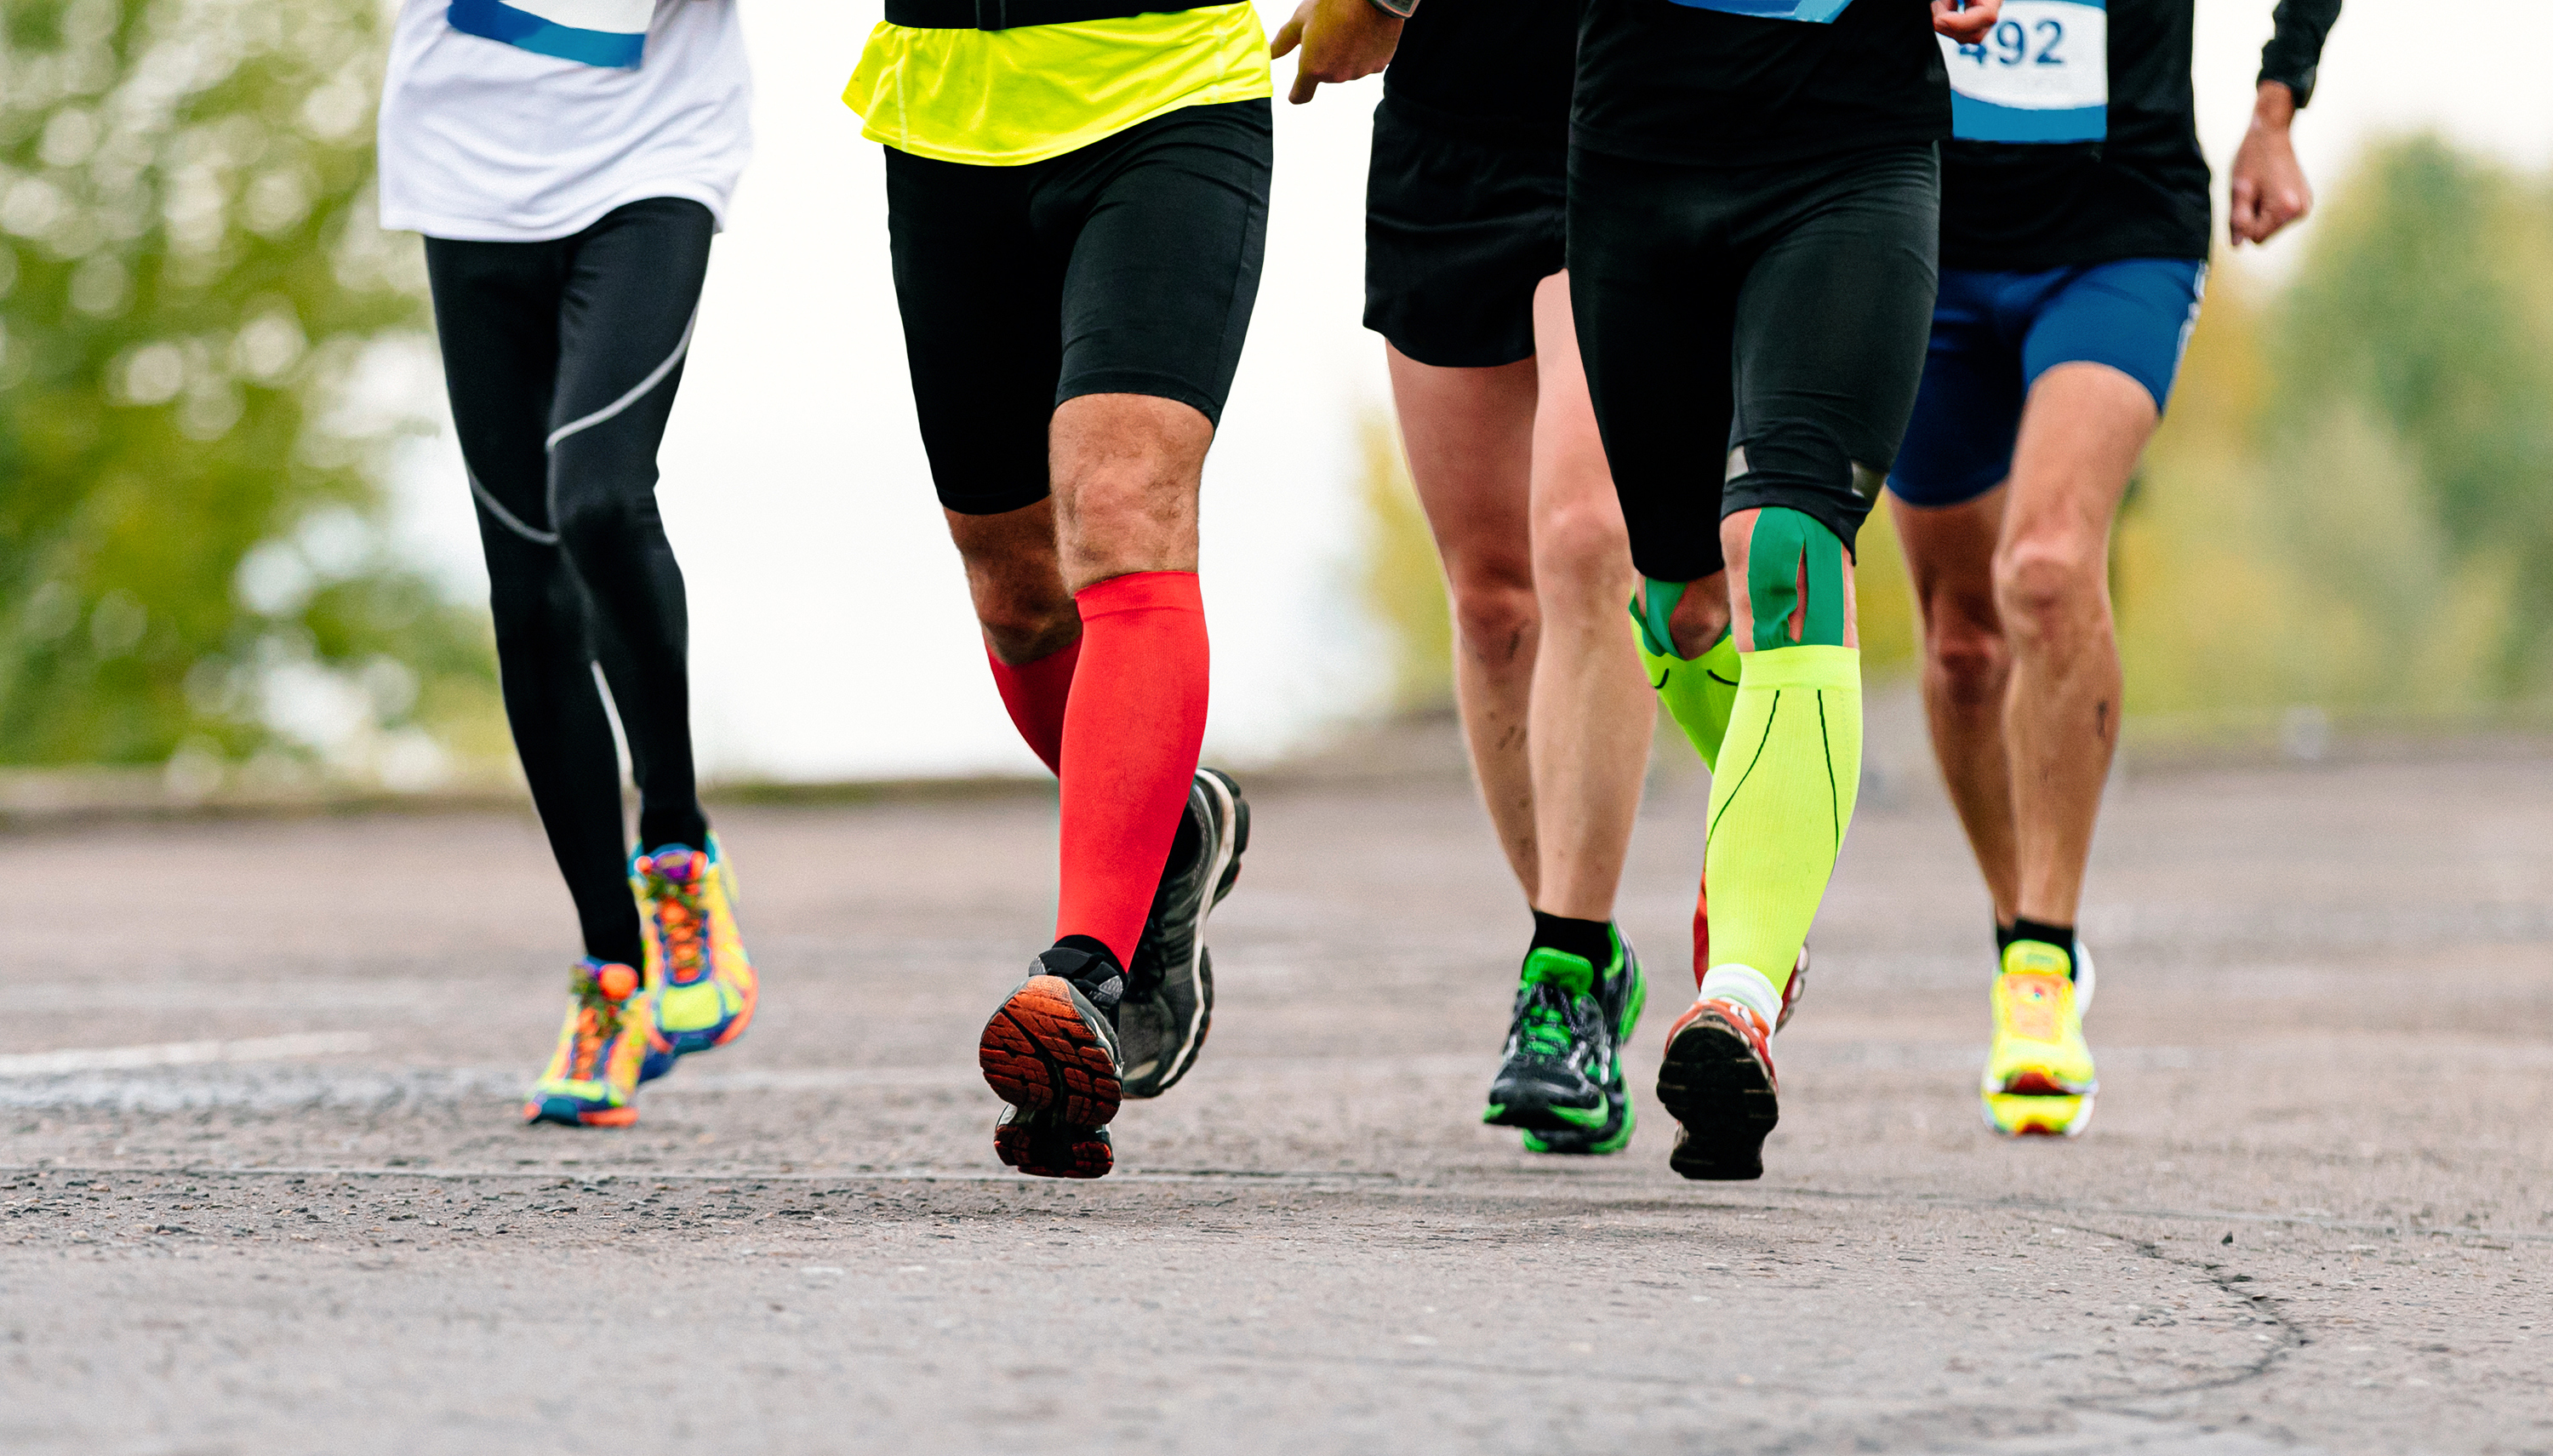 Joggers using colorful compression socks to help with blood flow